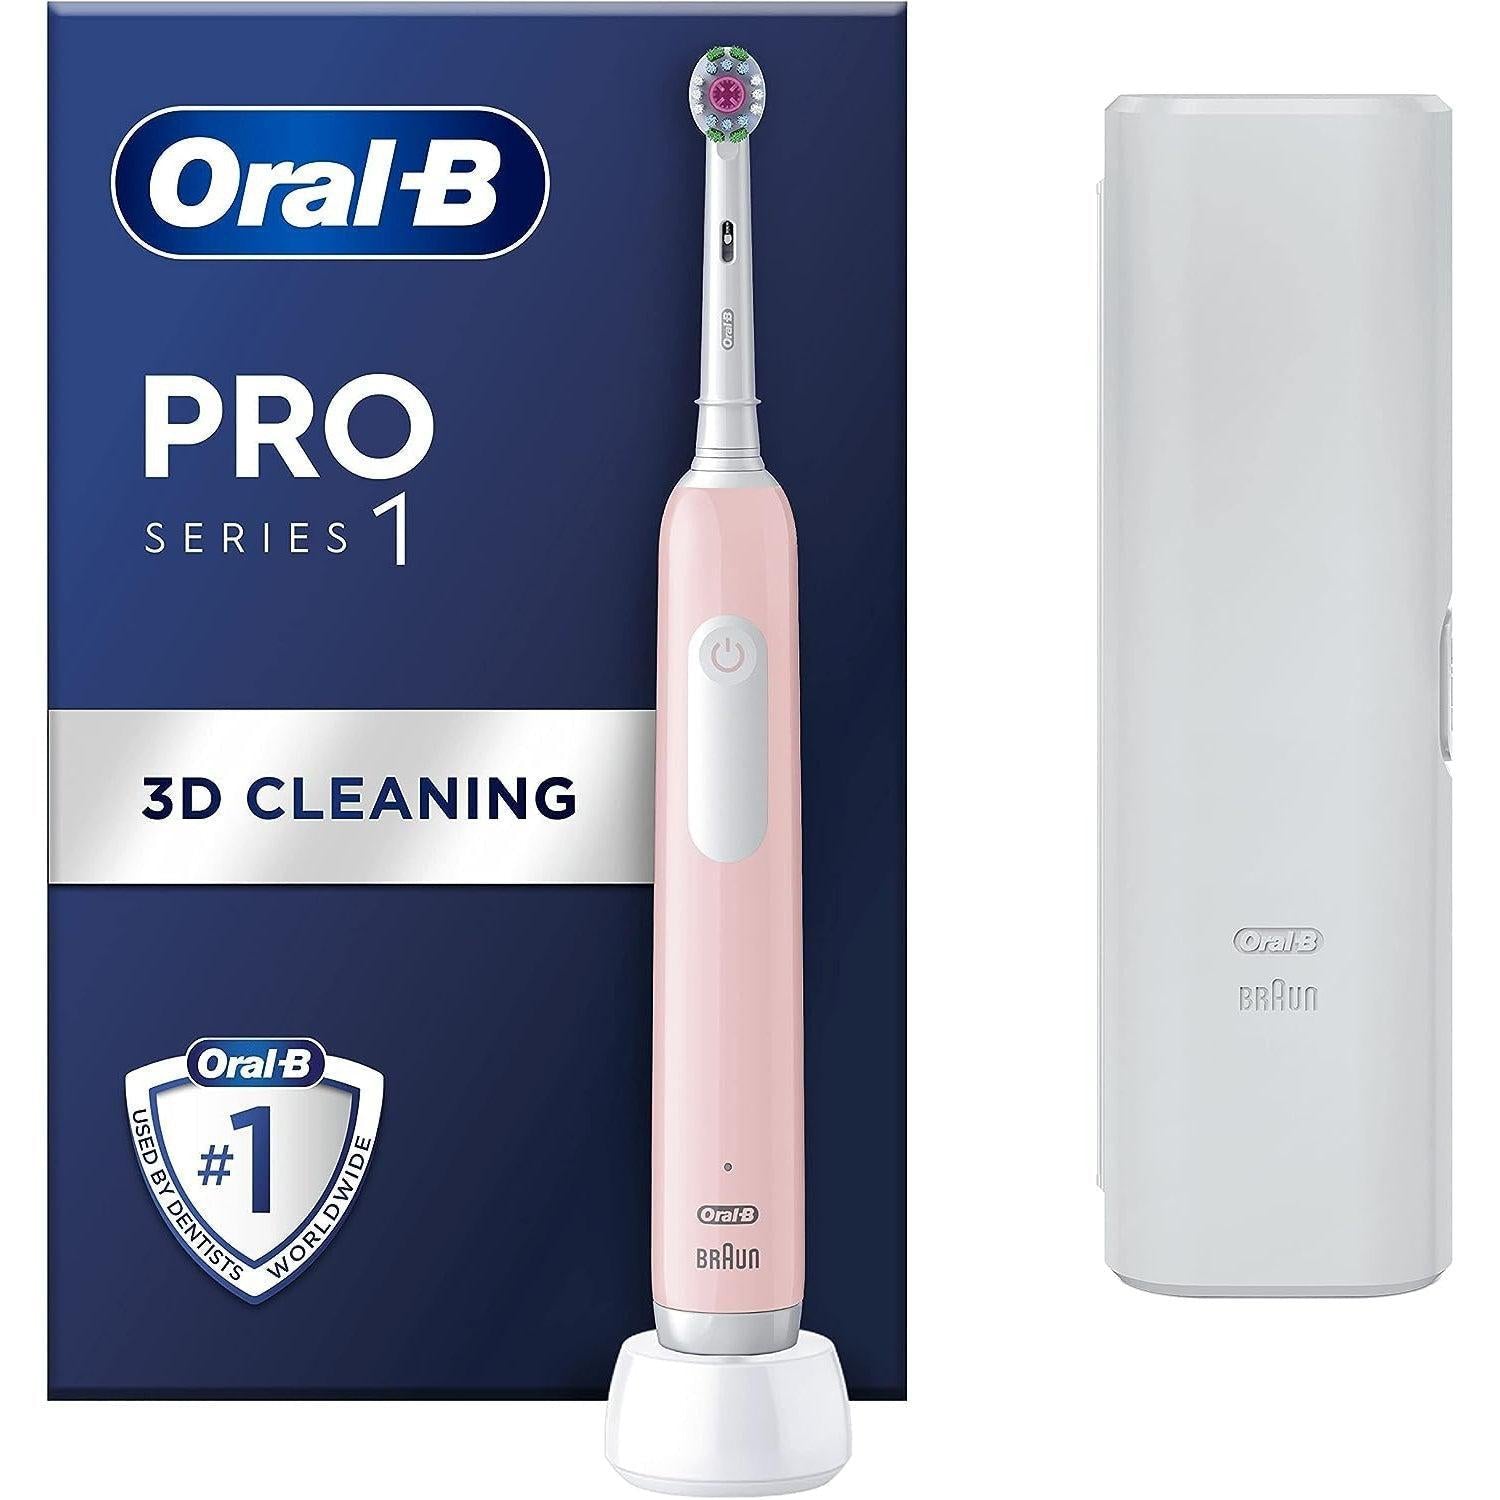 Oral-B Pro 1 Electric Toothbrush With 3D Cleaning, 1 Toothbrush Head & Travel Case, Gum Pressure Control, -Pink - Healthxpress.ie